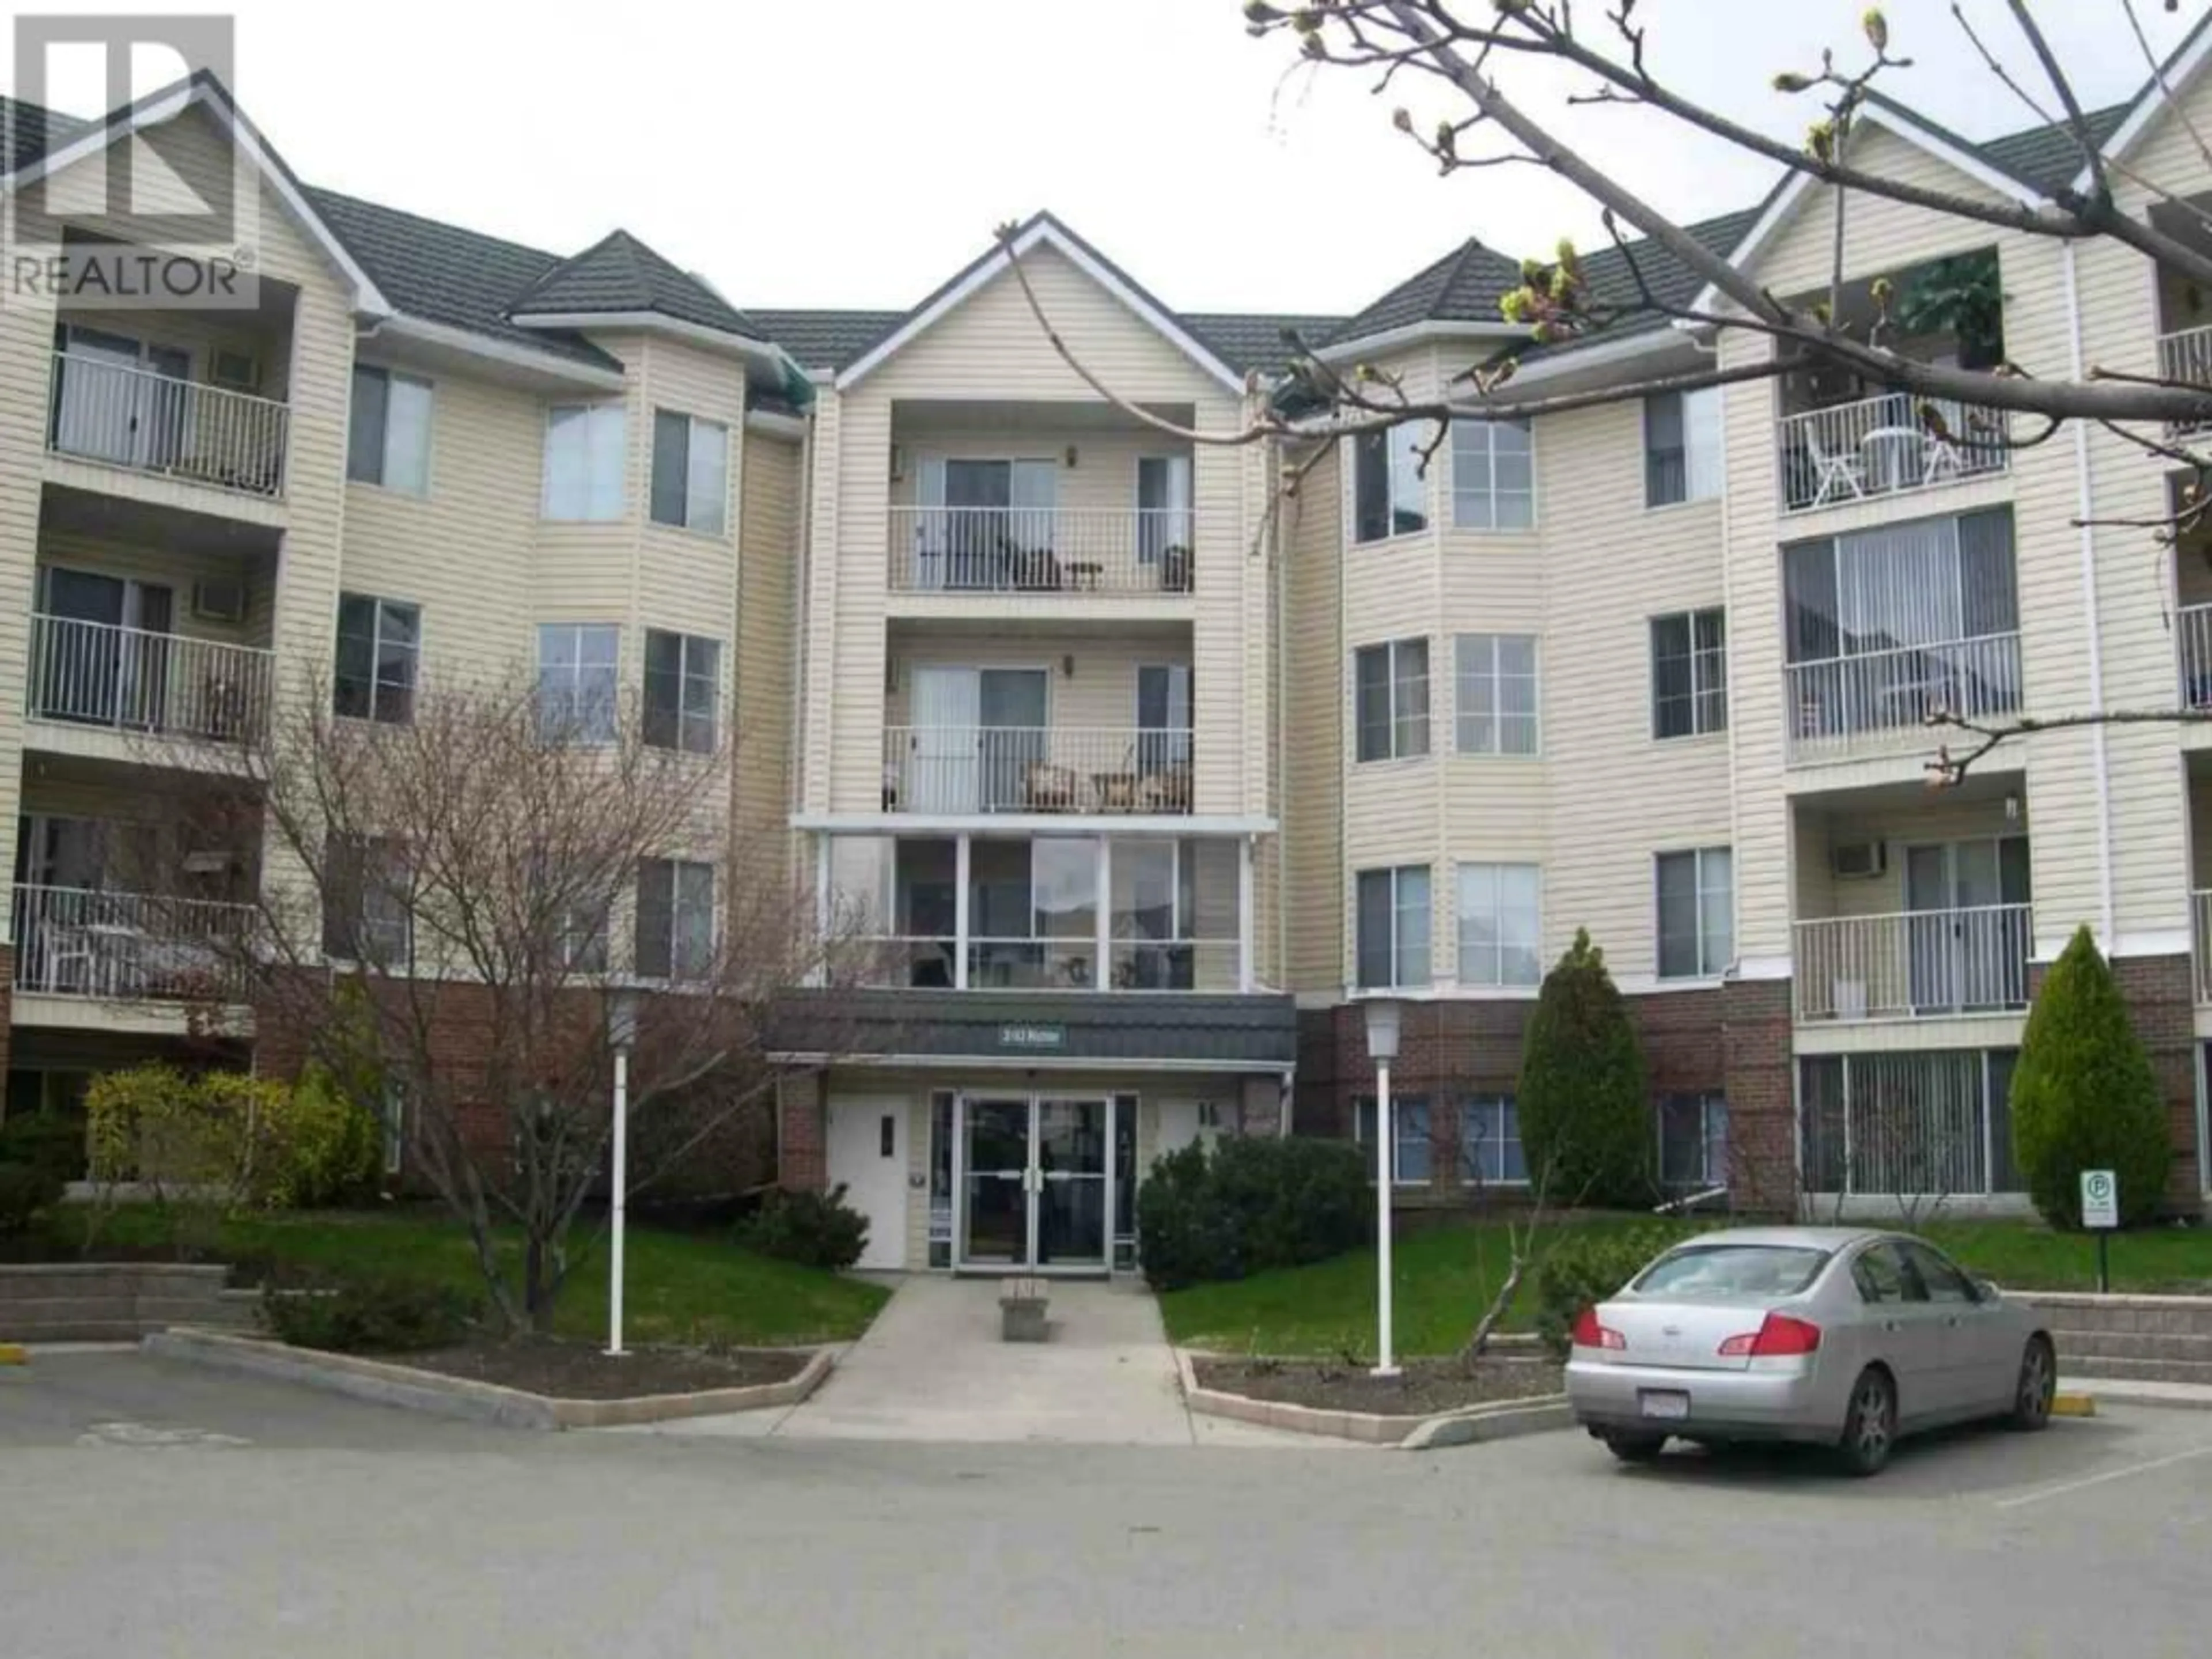 A pic from exterior of the house or condo for 3163 Richter Street Unit# 108, Kelowna British Columbia V1W3R4